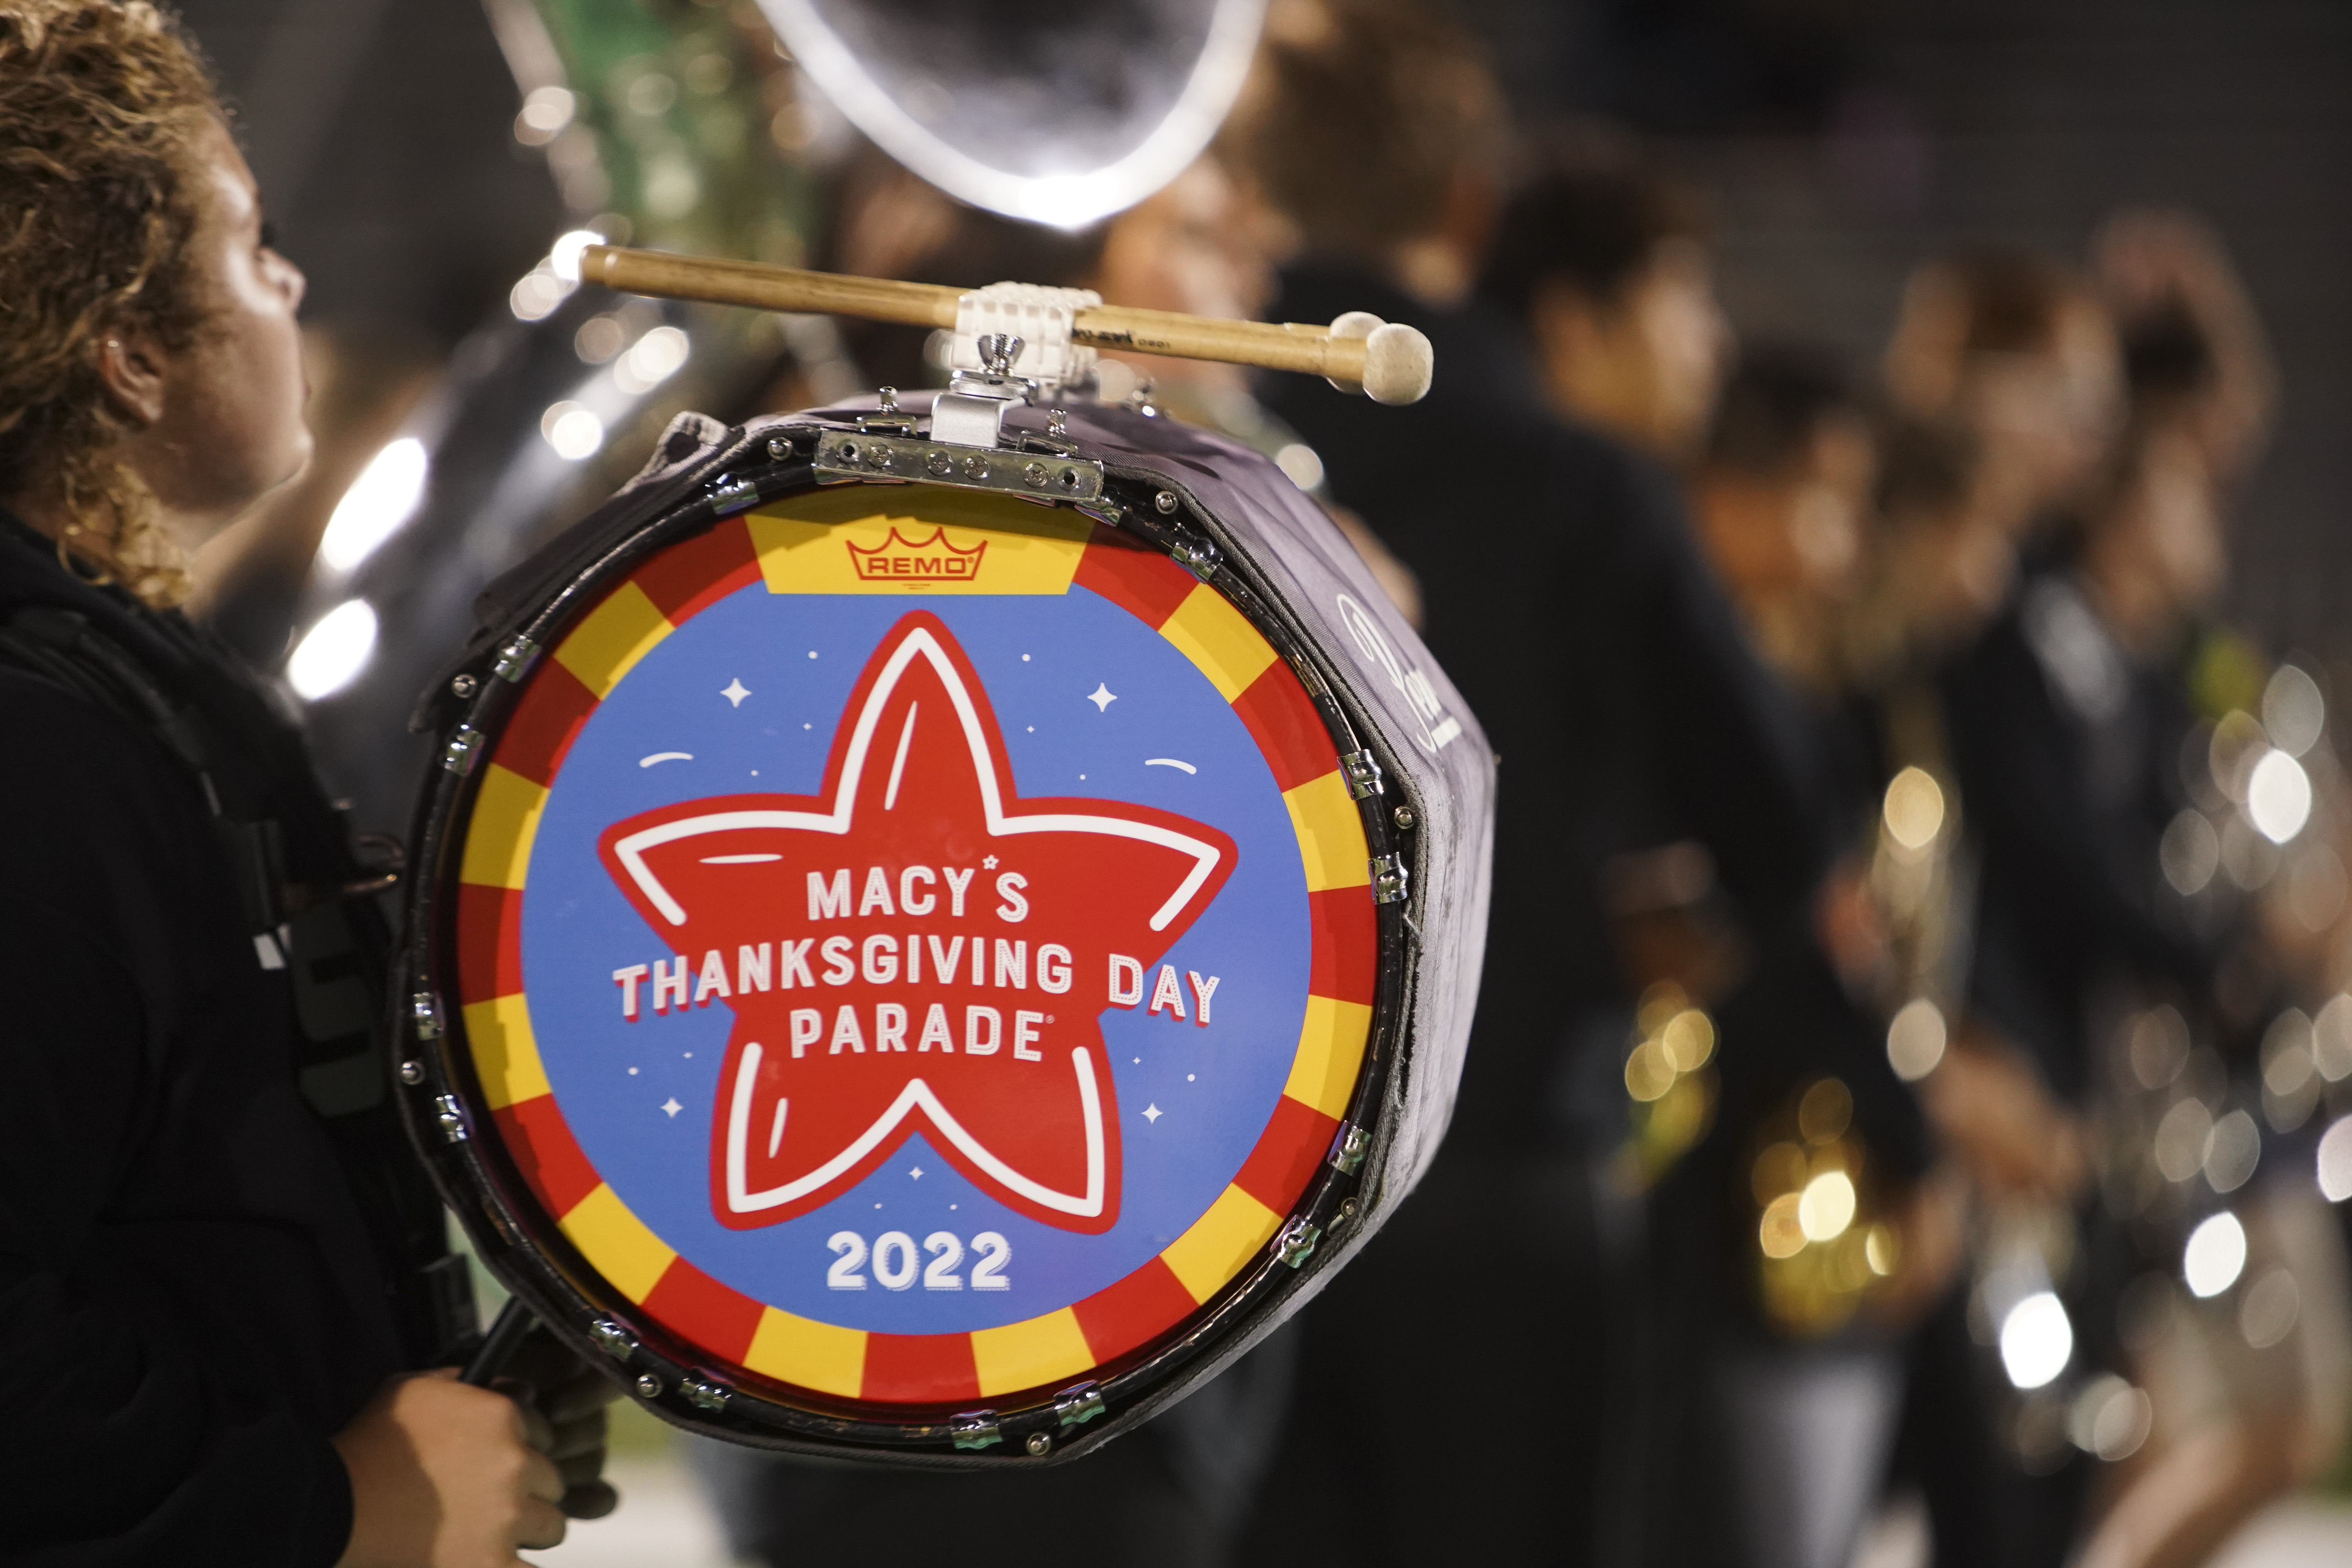 Mass. band to perform in 2024 Macy's Thanksgiving Day Parade